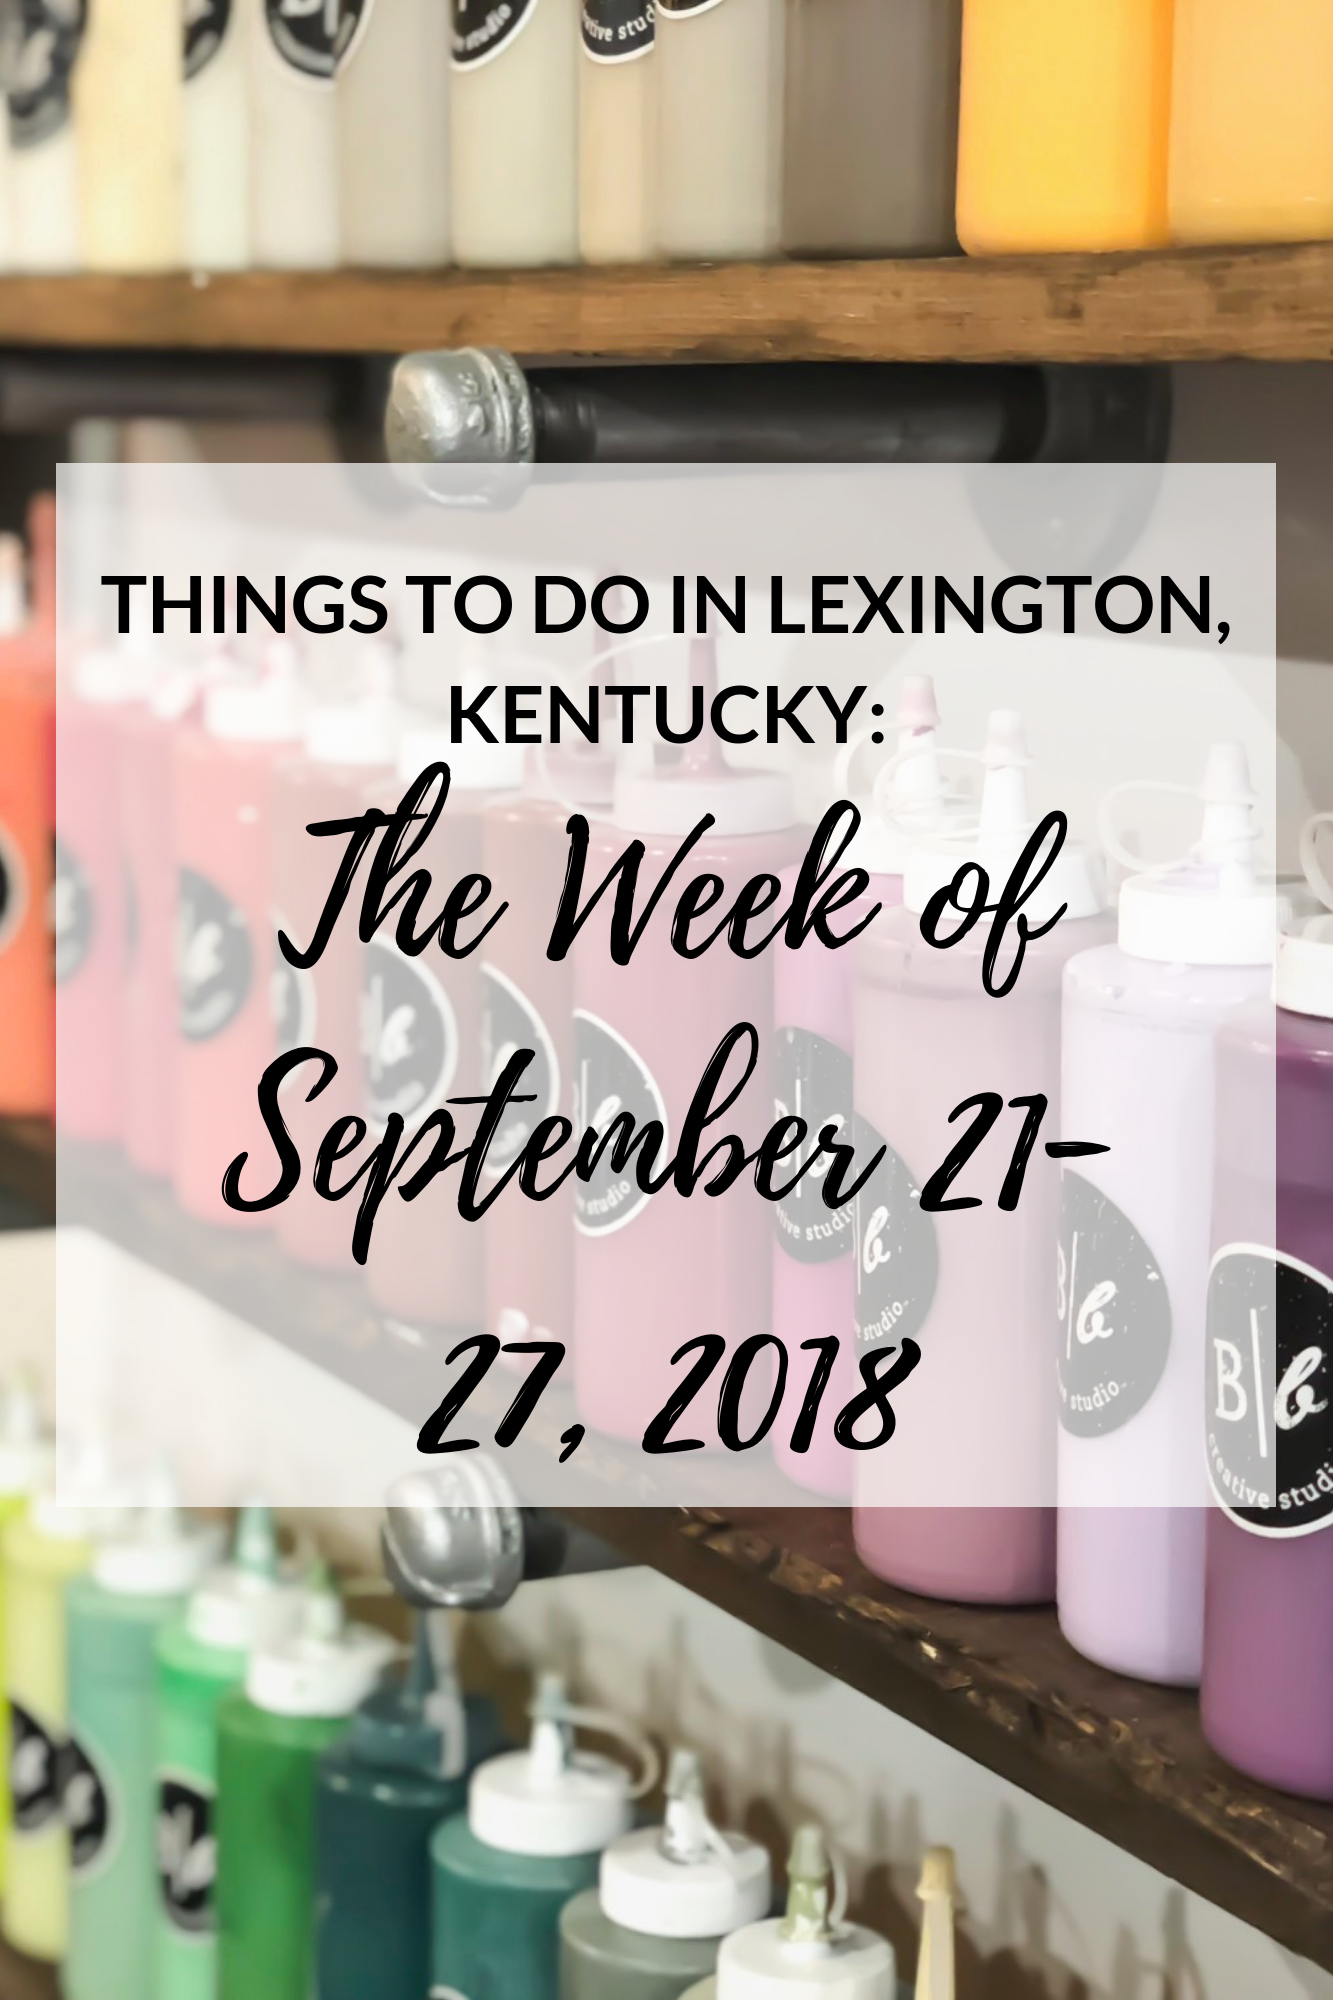 We've made it through another week! I've put together a short list of some upcoming events in Lexington this weekend and upcoming week! There are a lot of fun things coming up, so be sure to check them out! #lexington #travel #event #kentucky